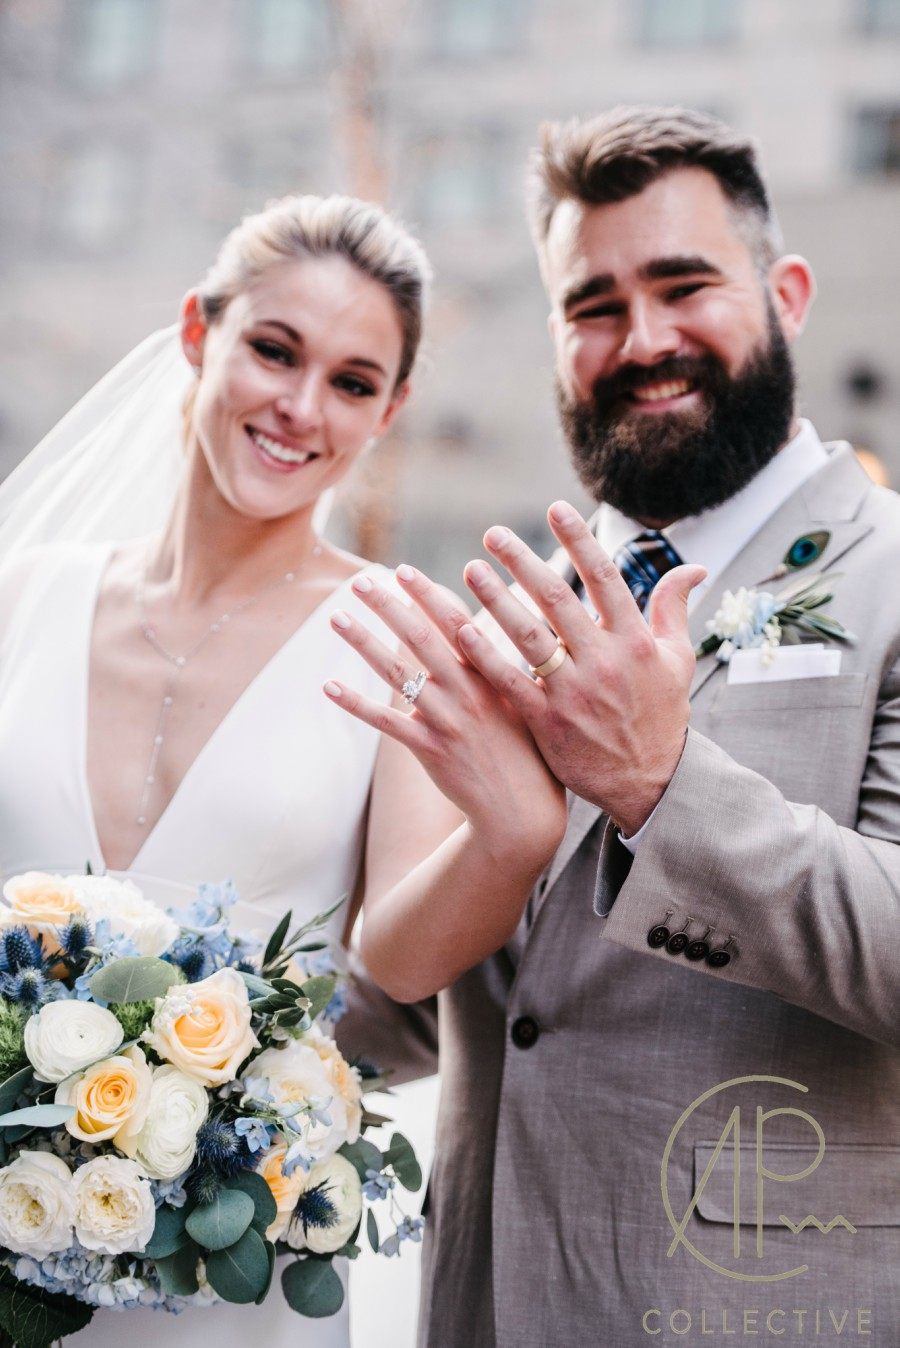 "HAPPY ANNIVERSARY " to Jason Kelce as He and His Wife celebrates their 7-years Marriage  Anniversary Today ..